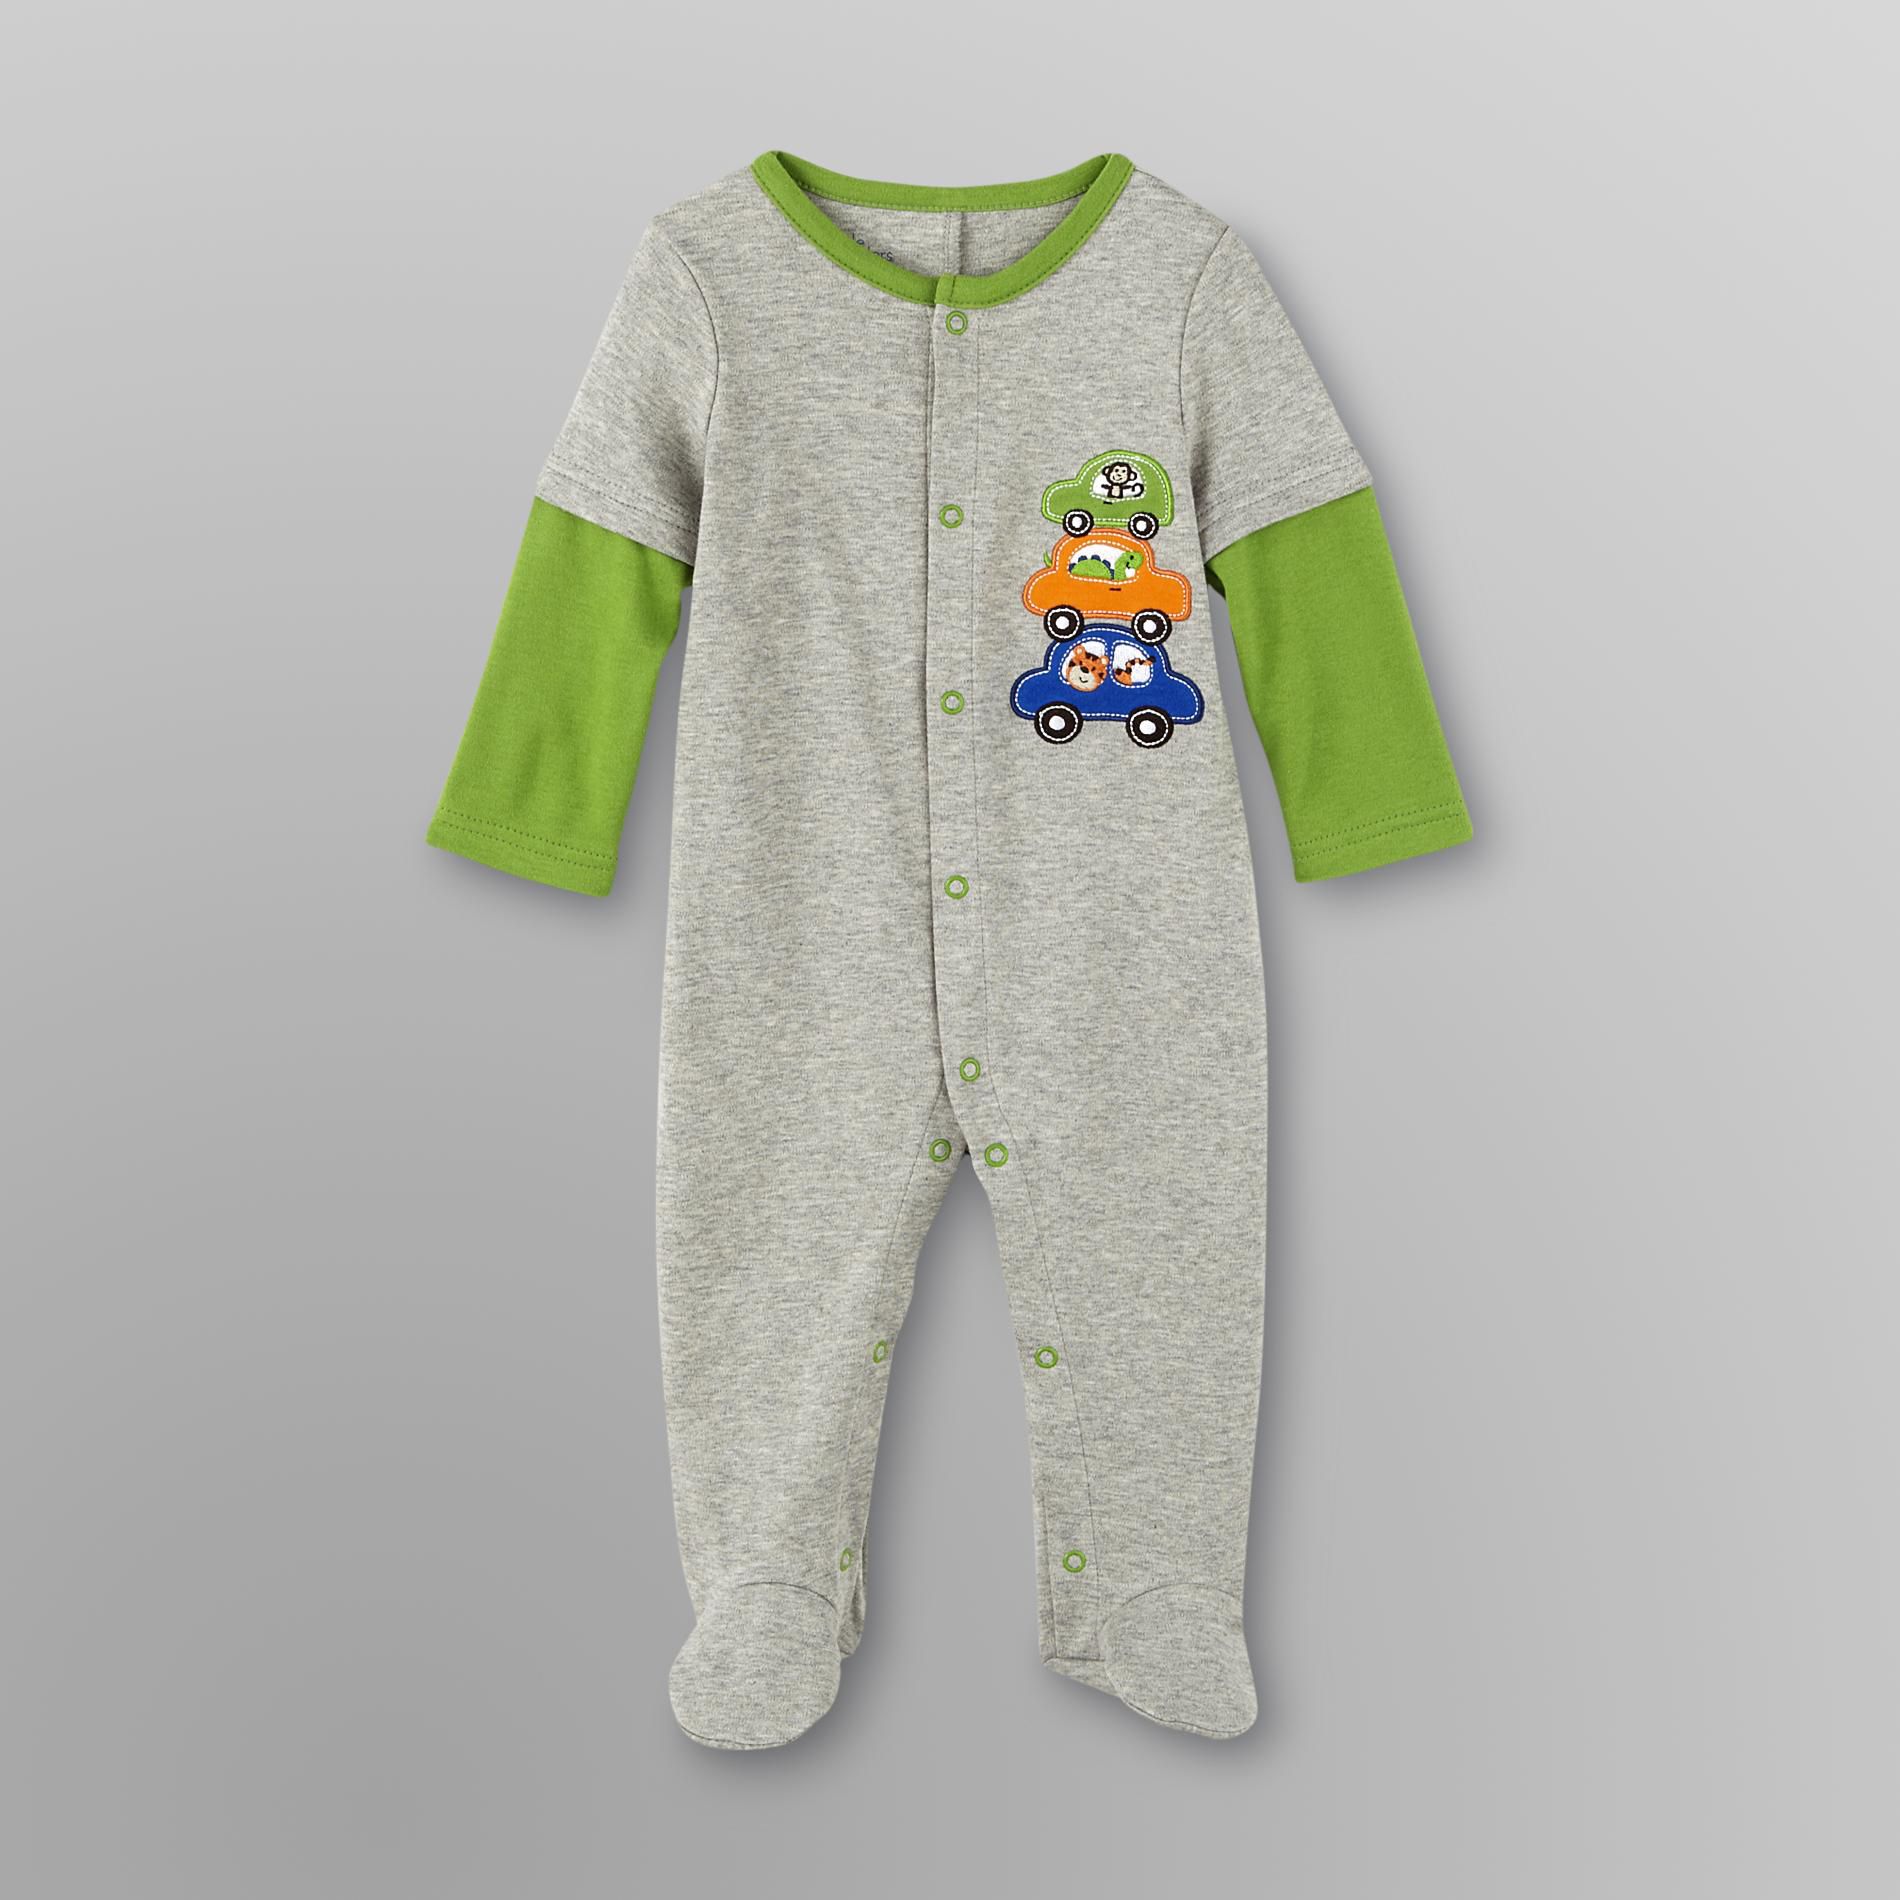 Little Wonders Infant Boy's Footed Pajamas - Animals Cars